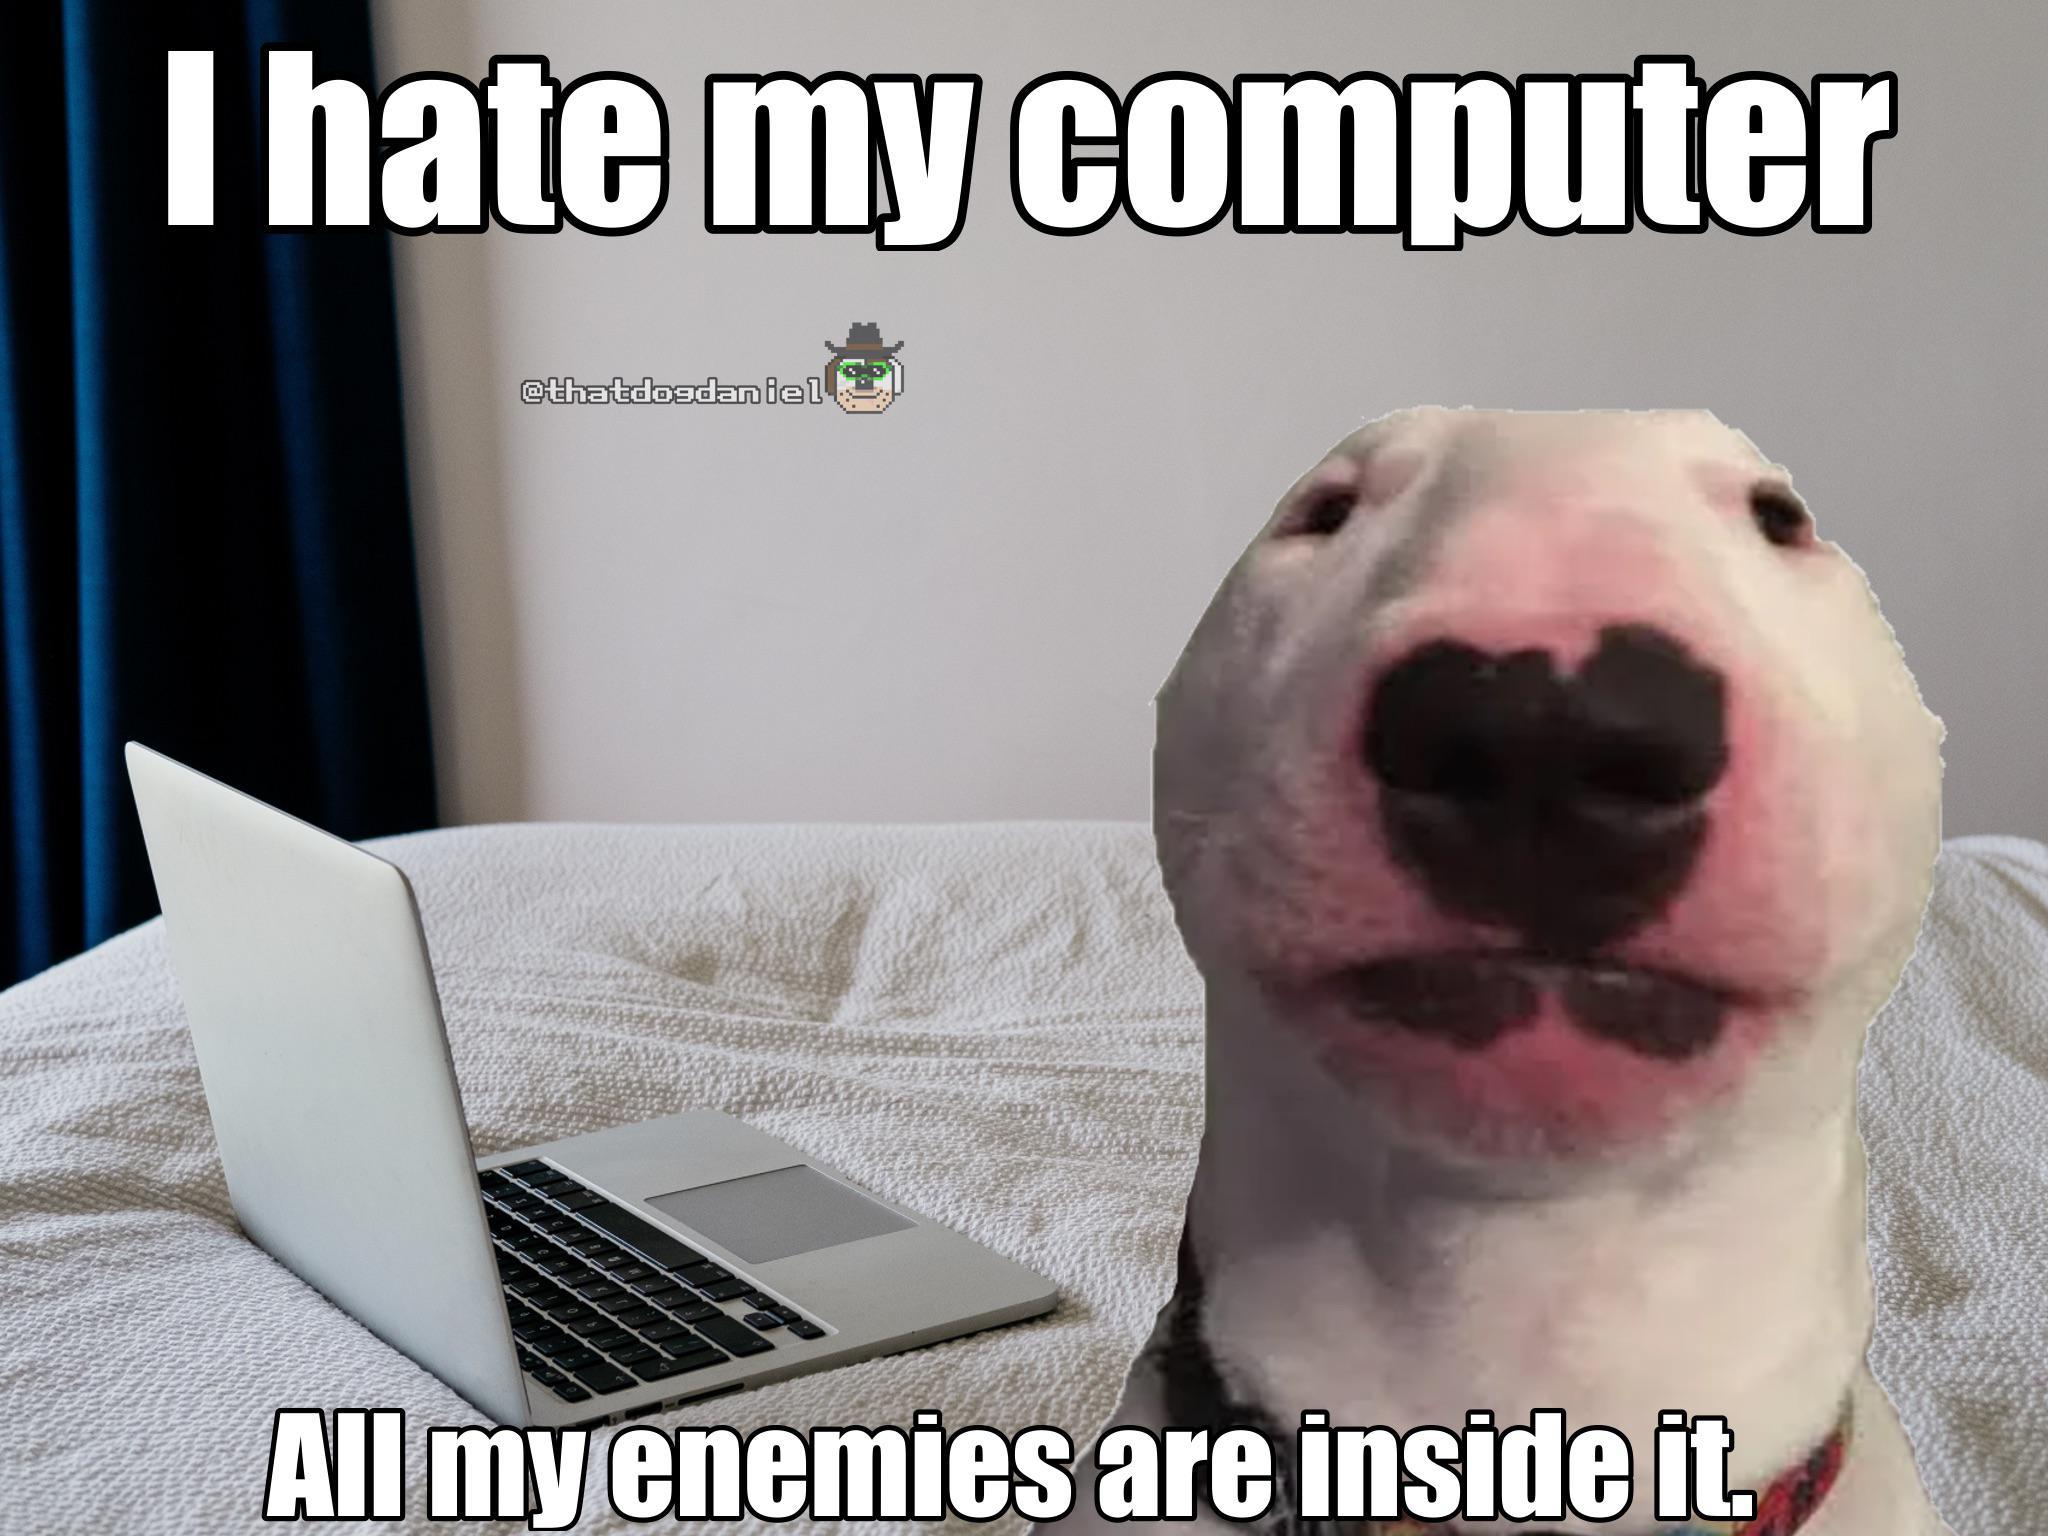 Le very wholesome puter meme has arrived rdogelore ironic doge memes know your meme